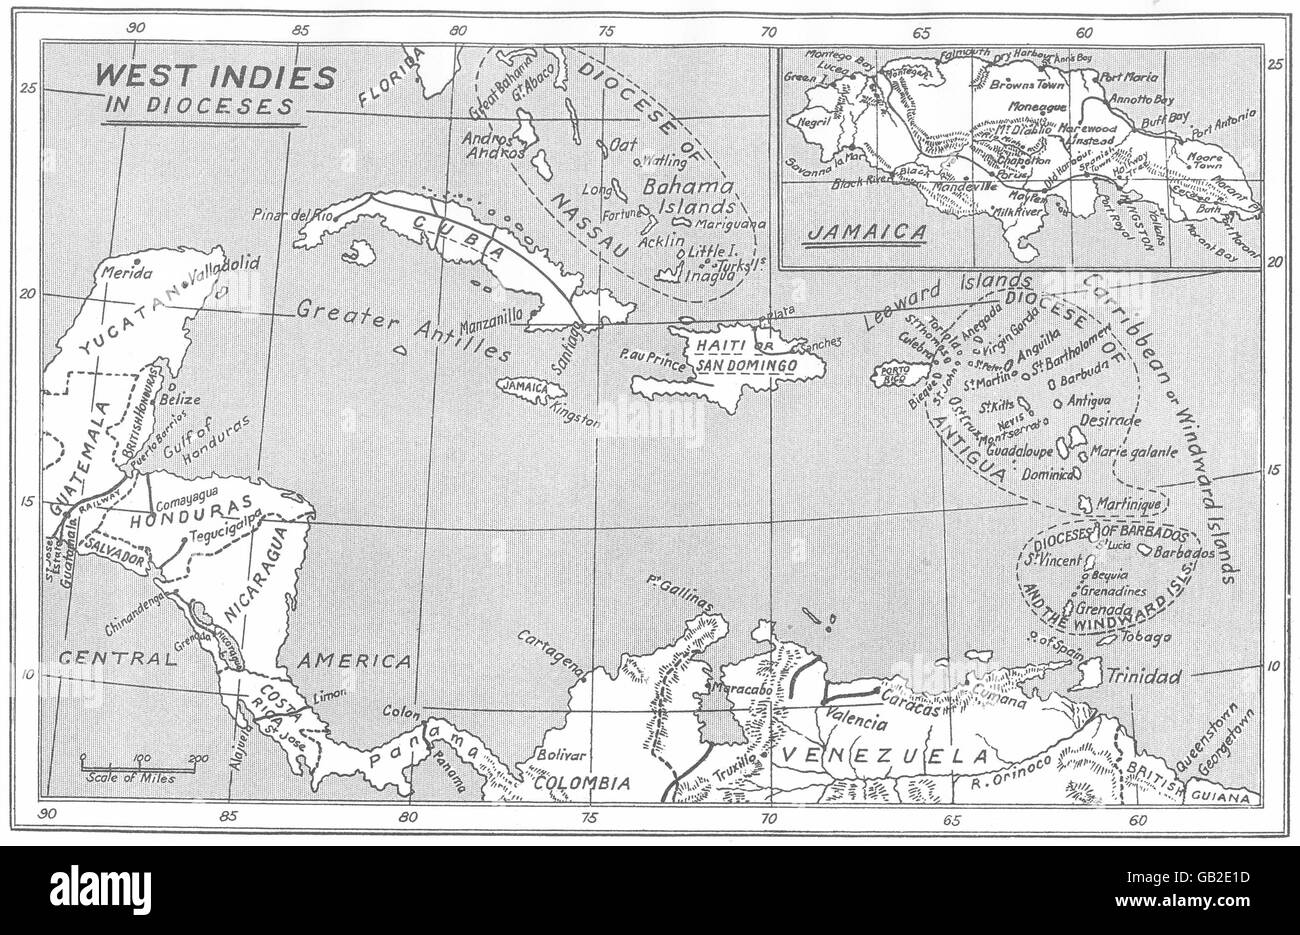 WEST INDIES: West Indies in Dioceses; USA Bishoprics Church of England, 1922 map Stock Photo